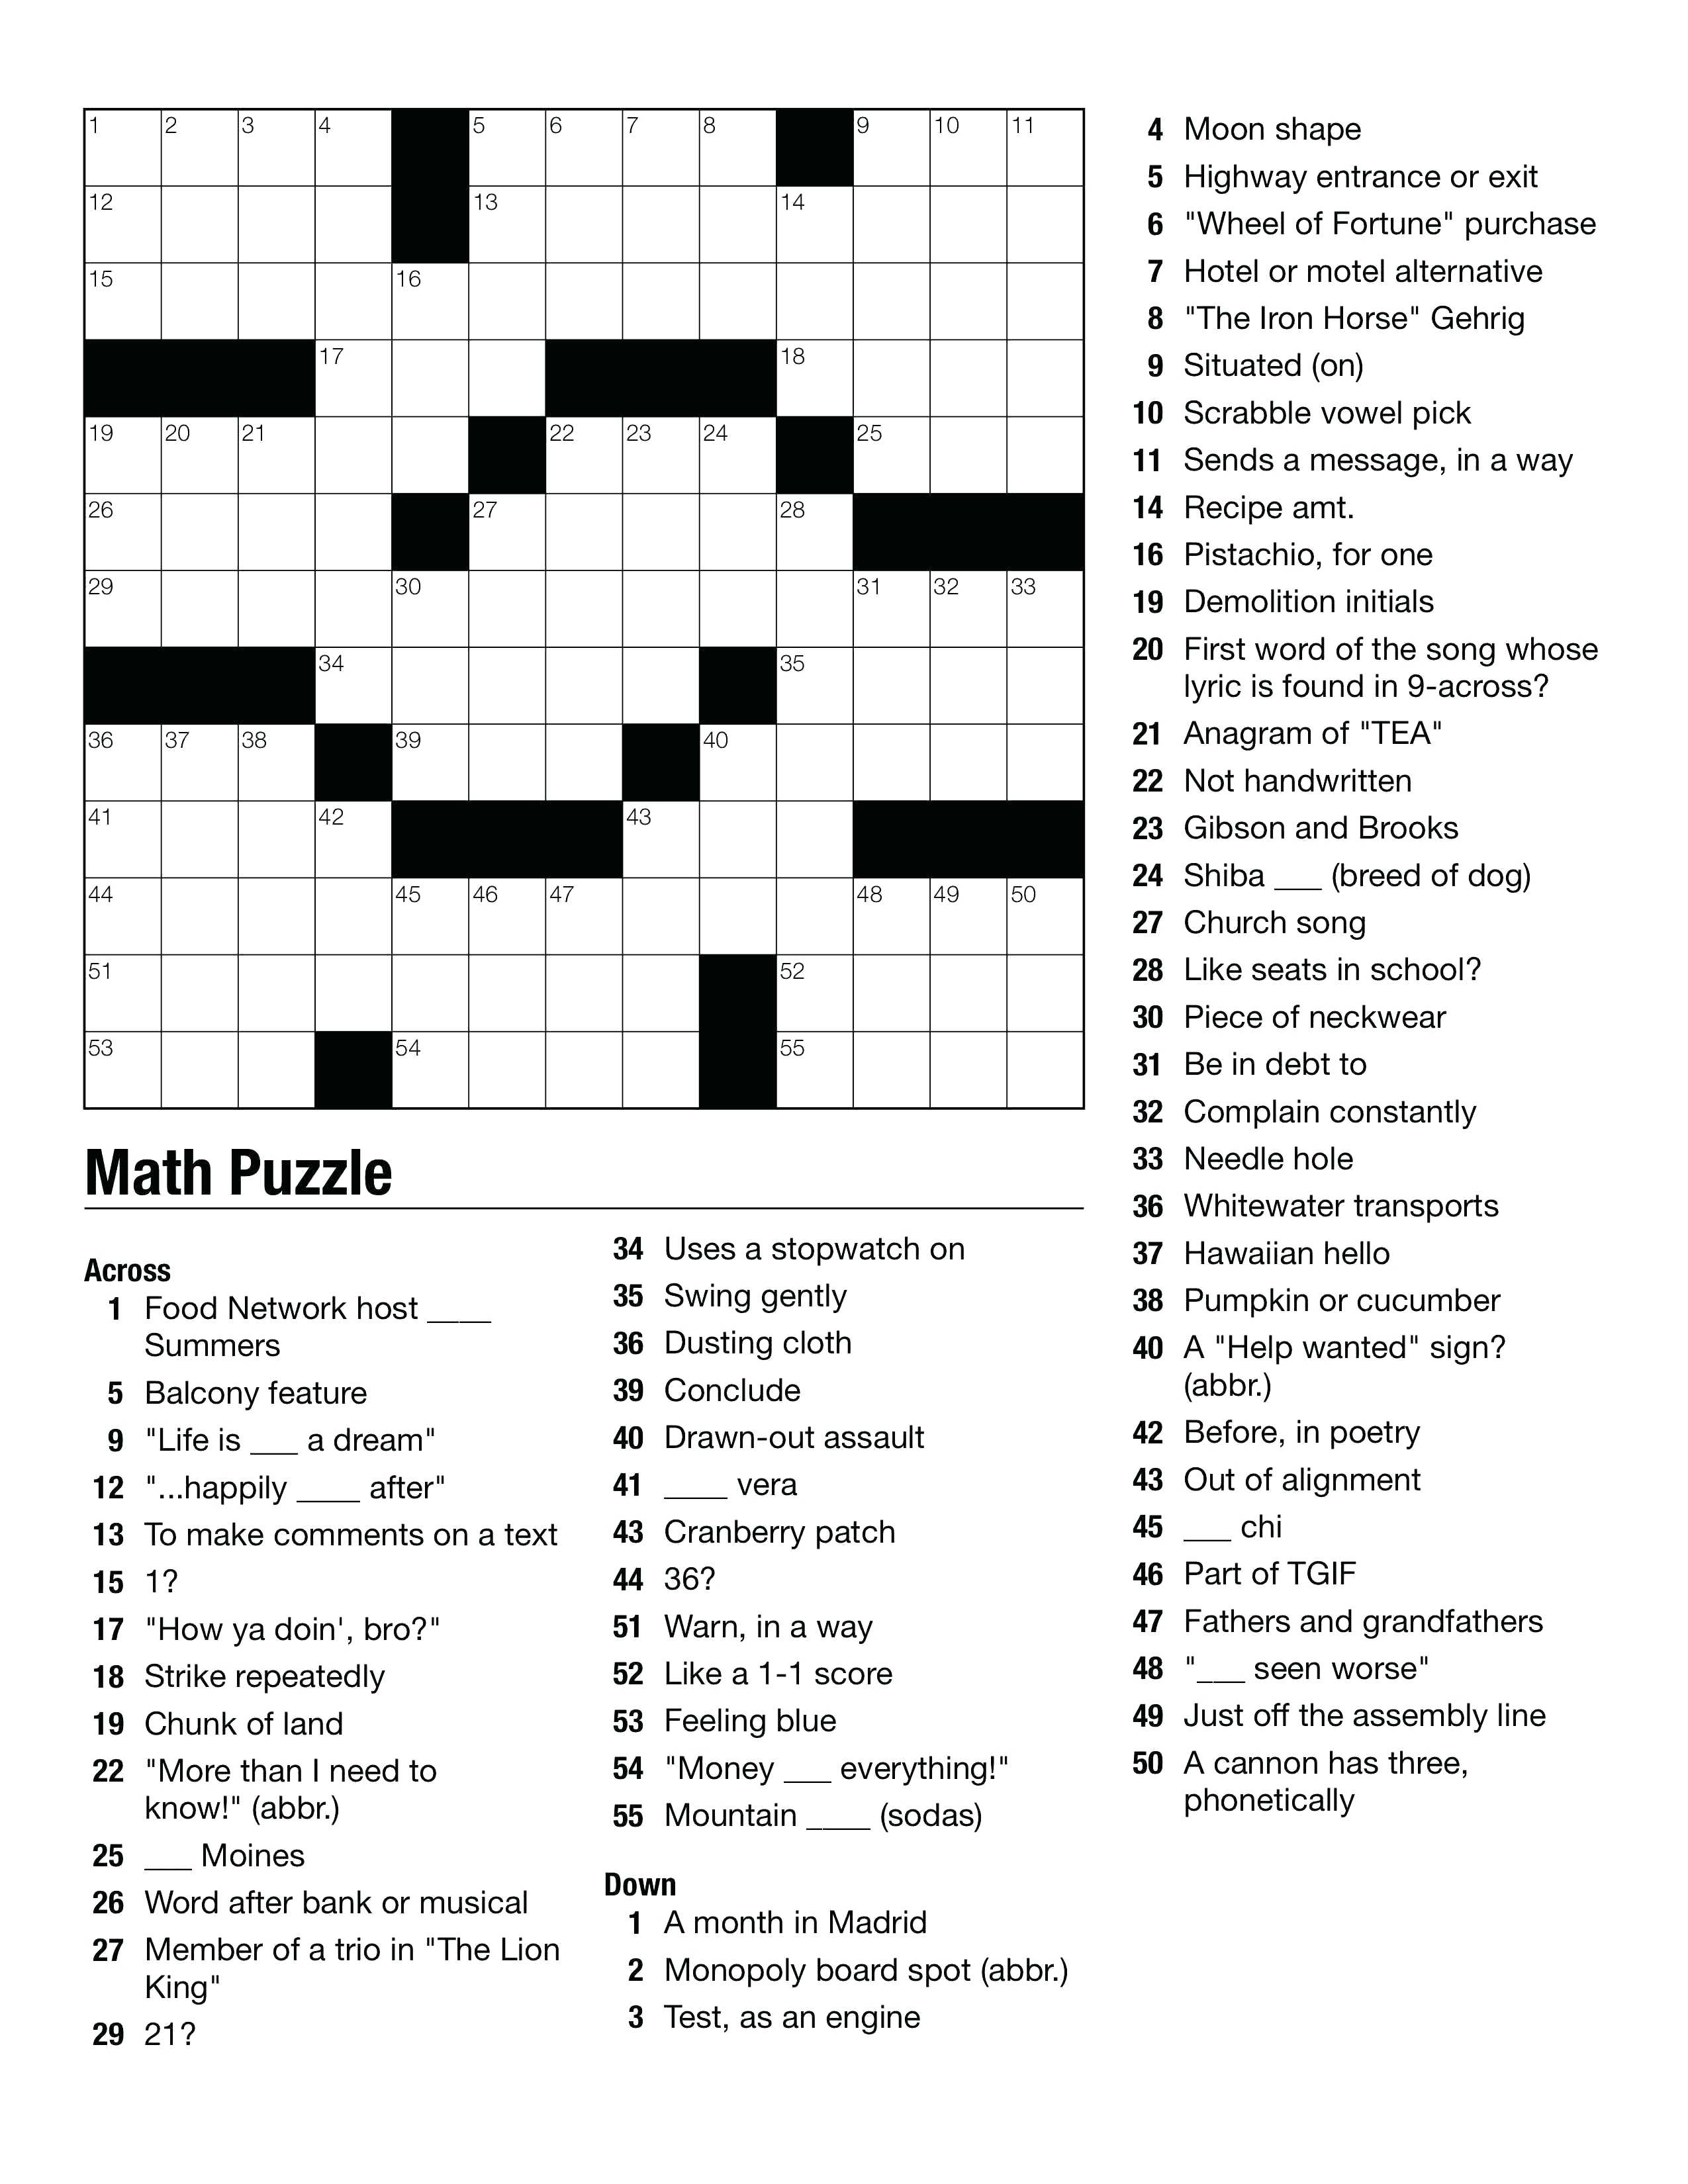 Geometry Puzzles Math Geometry Images Teaching Ideas On Crossword - Printable Crossword Puzzles For Middle Schoolers